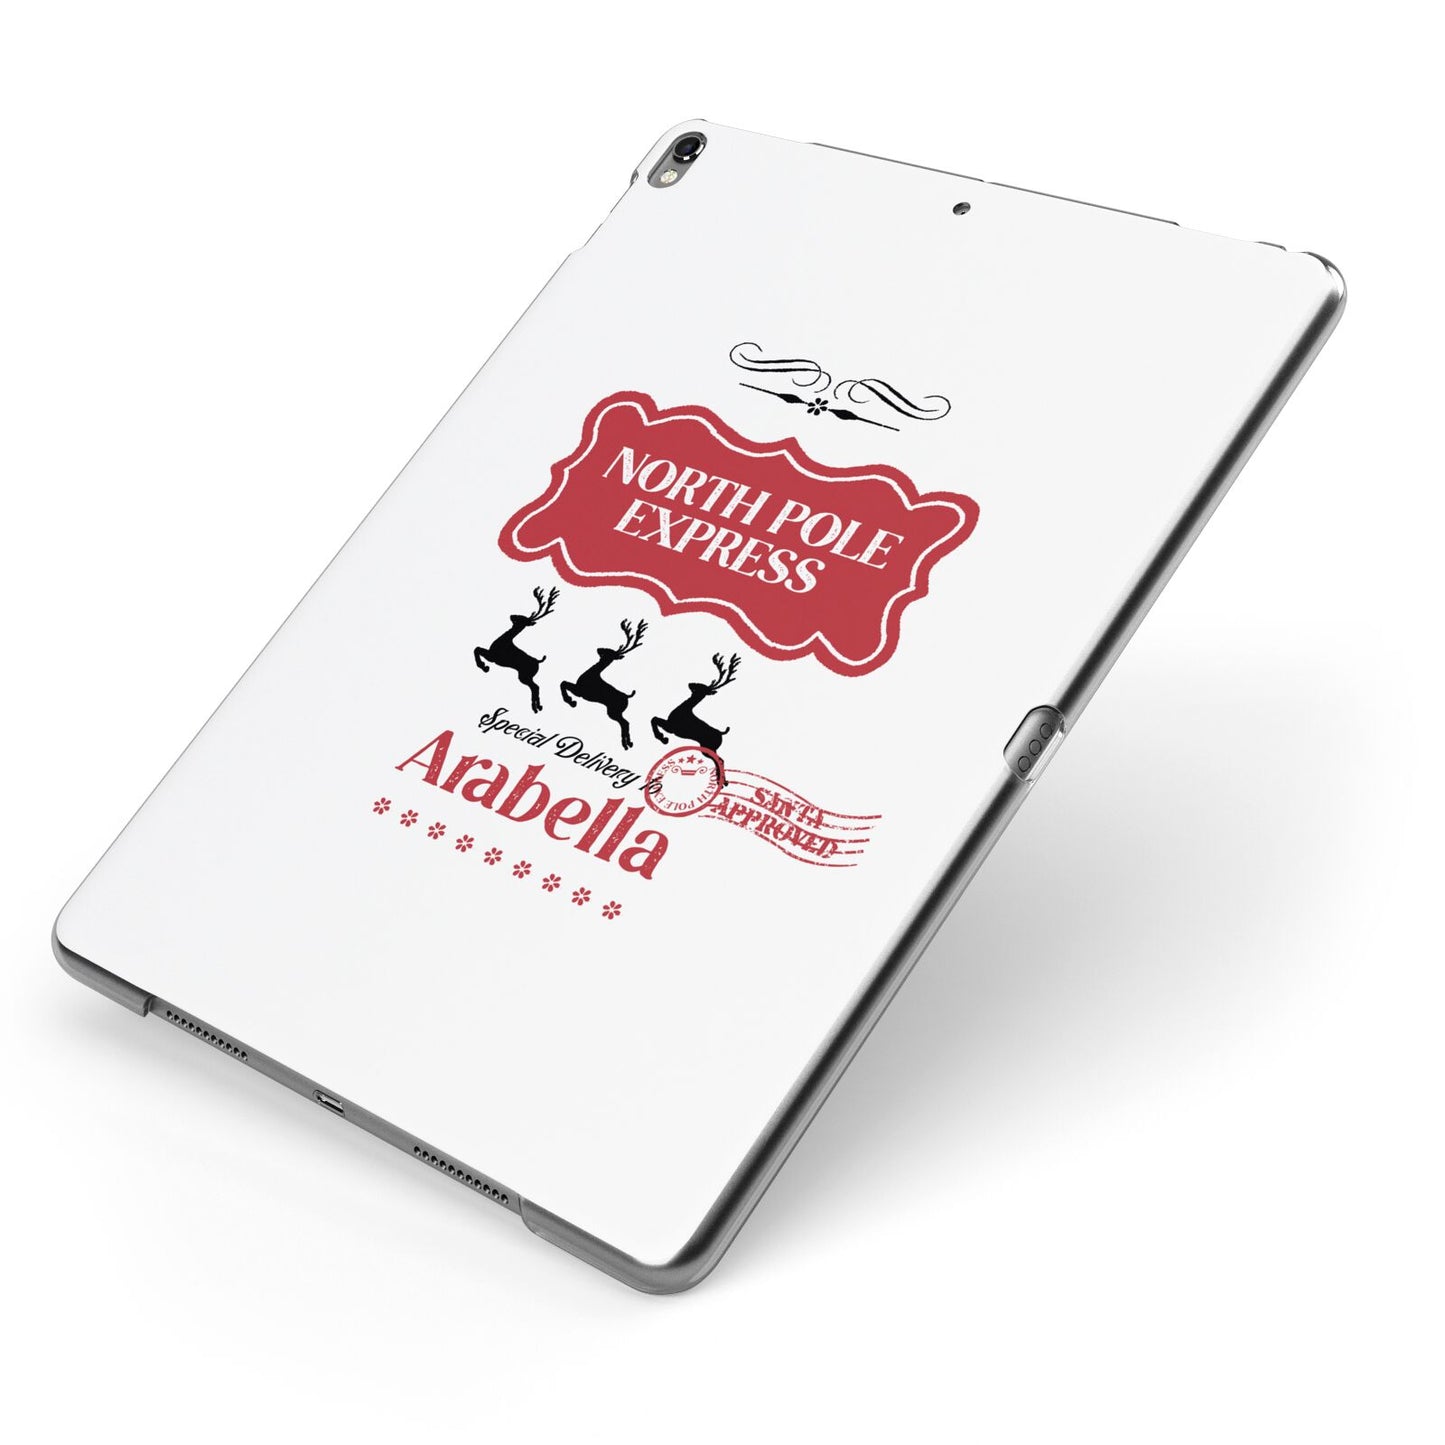 North Pole Express Personalised Apple iPad Case on Grey iPad Side View